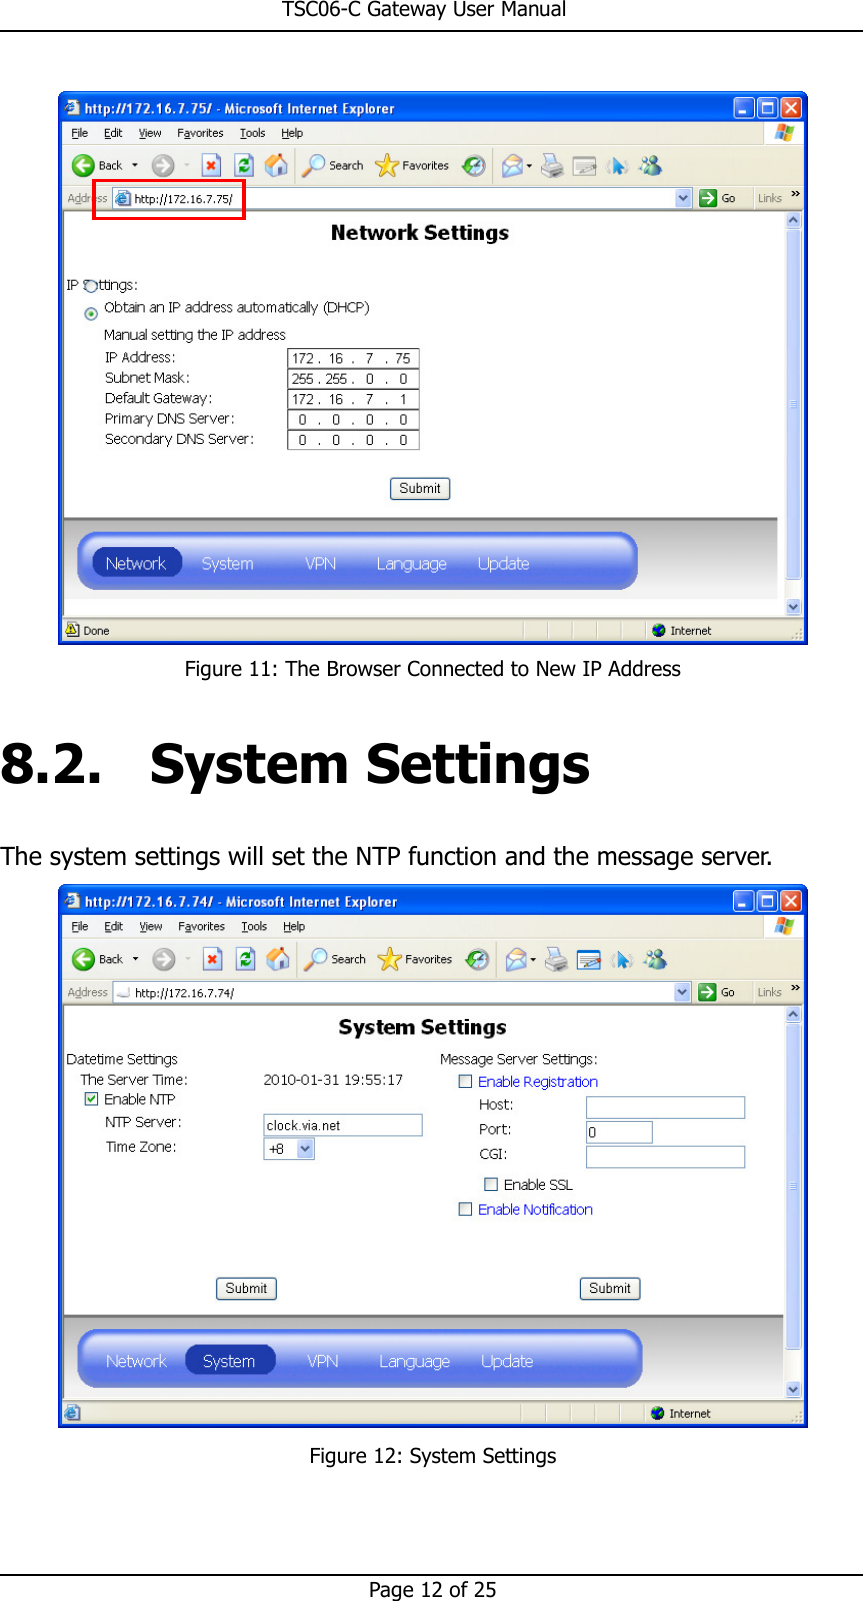                                                       TSC06-C Gateway User Manual   Page 12 of 25   Figure 11: The Browser Connected to New IP Address 8.2. System Settings The system settings will set the NTP function and the message server.  Figure 12: System Settings  